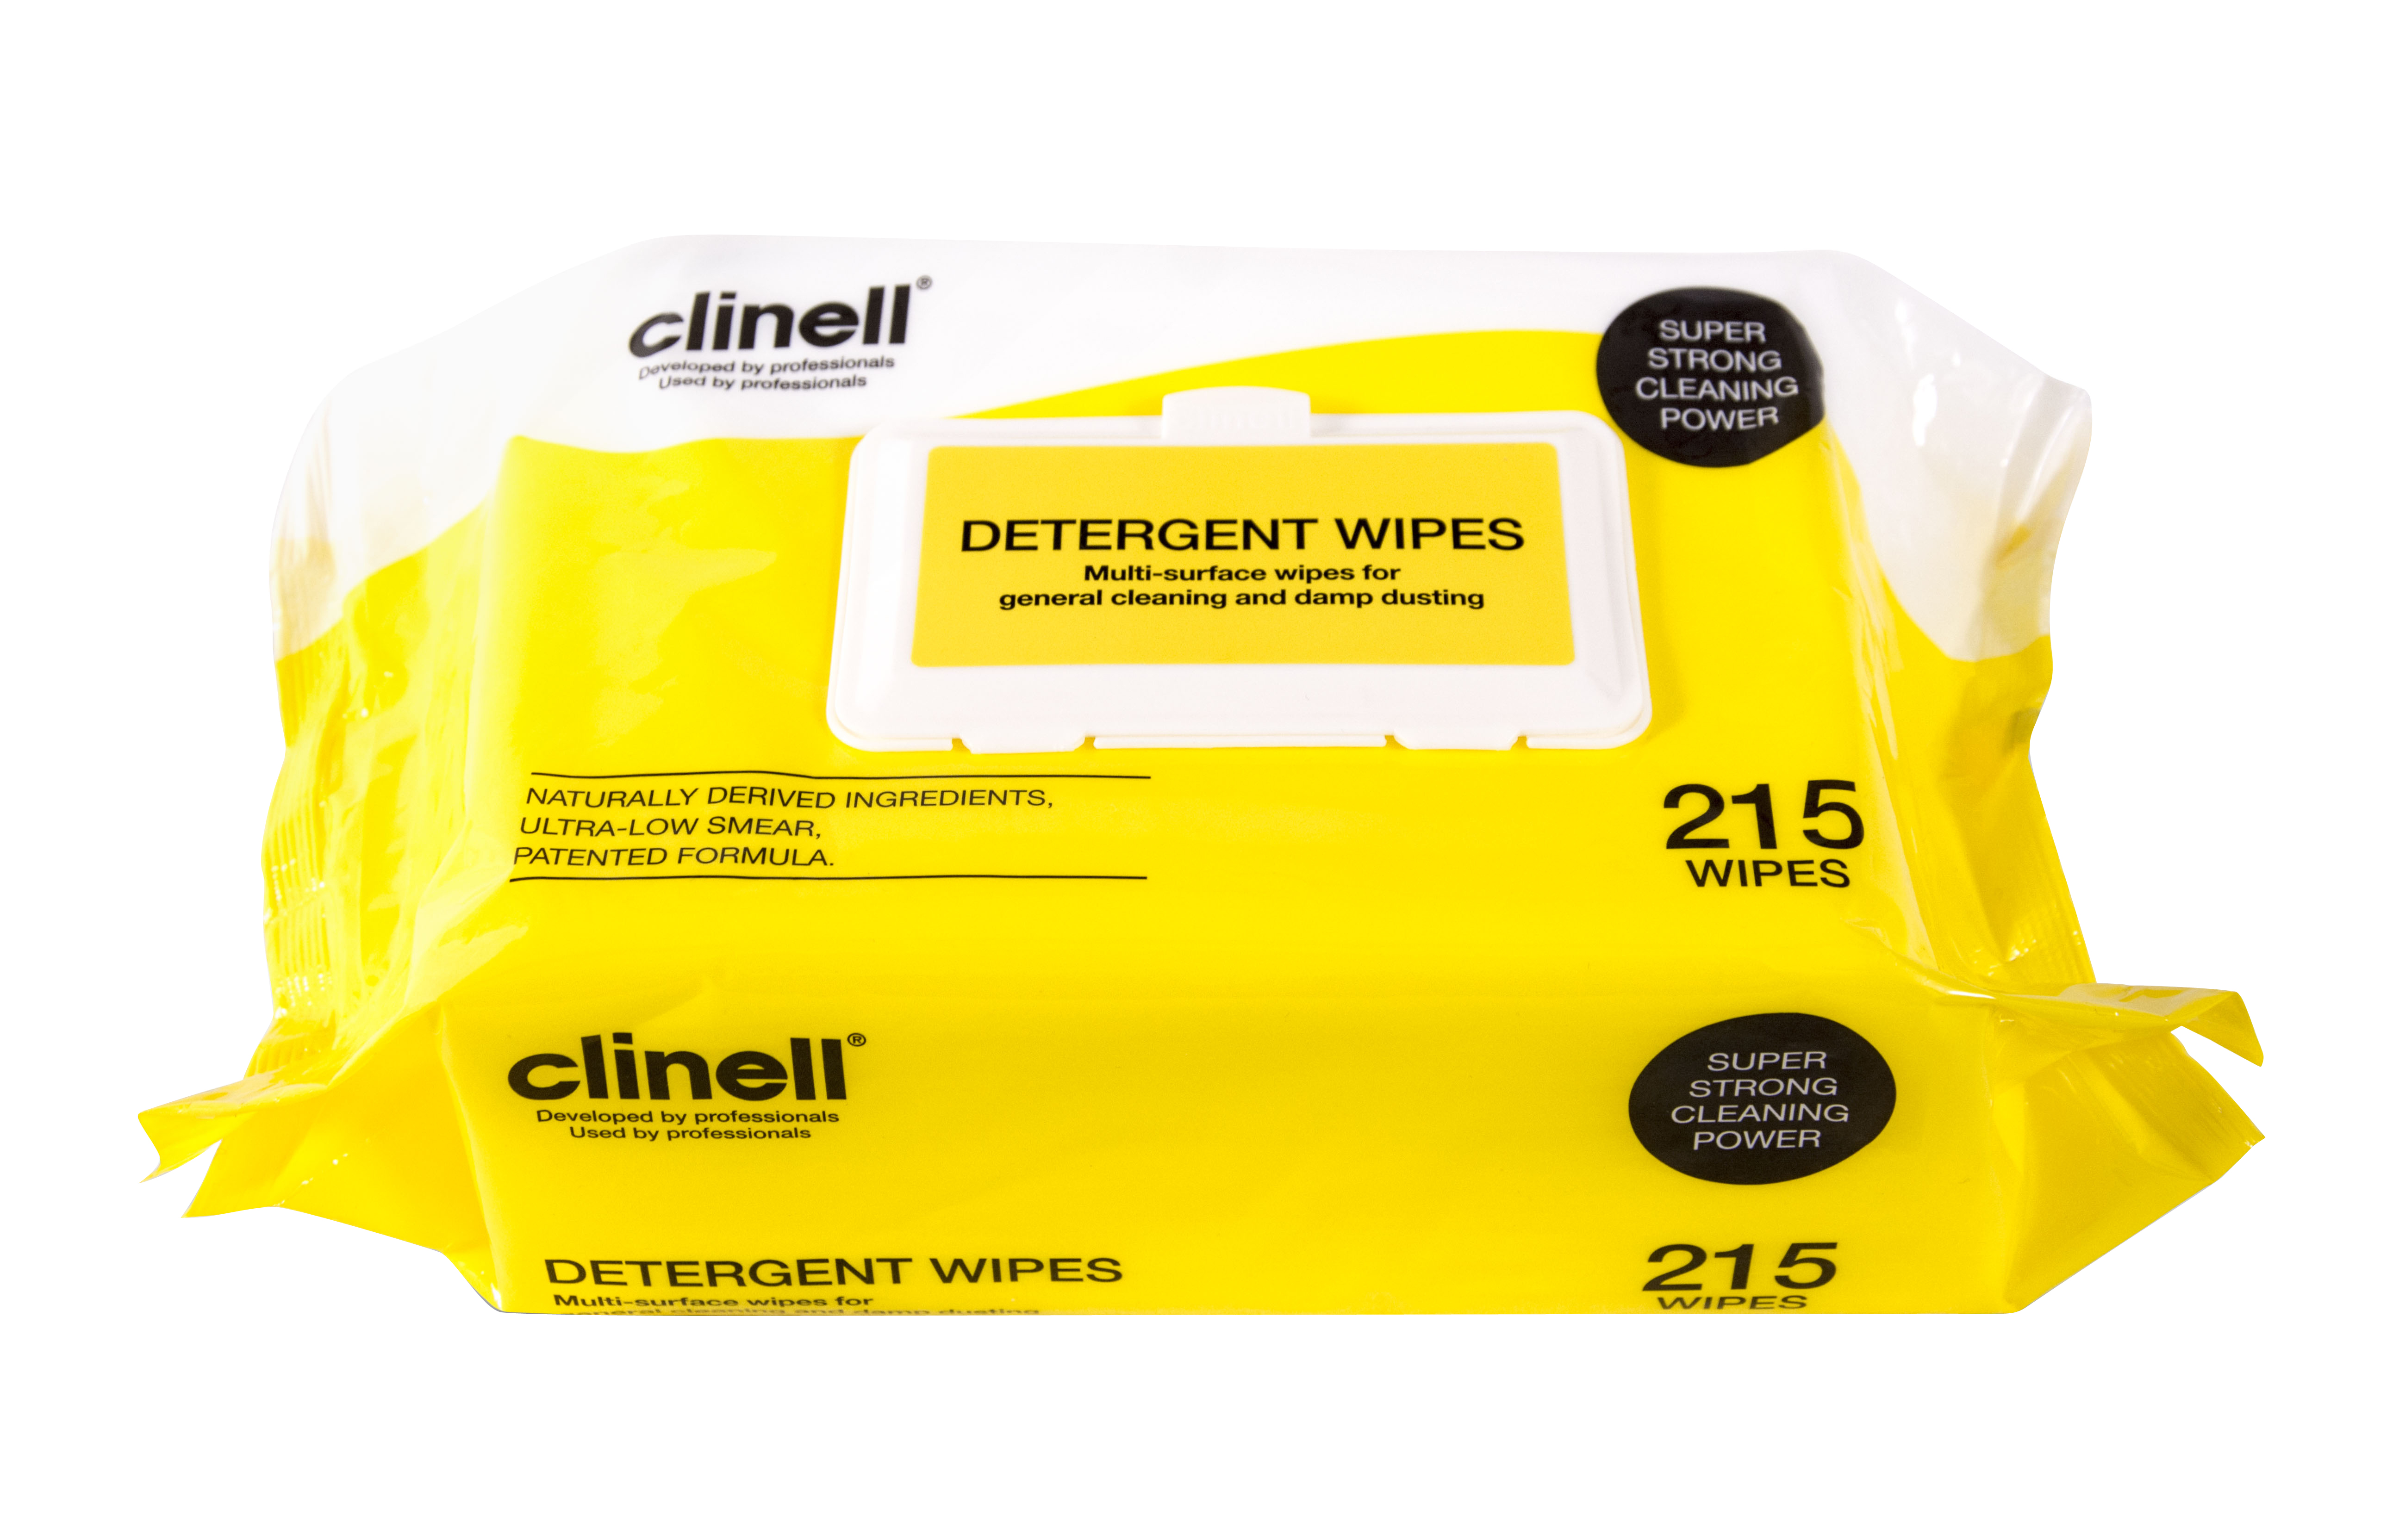 Strong cleaning. Clinell Sporidical wipes салфетки. Clinell sporicadal салфетки. Cleaning Multi - surface wipes. Strong Cleaning Power запчасти.